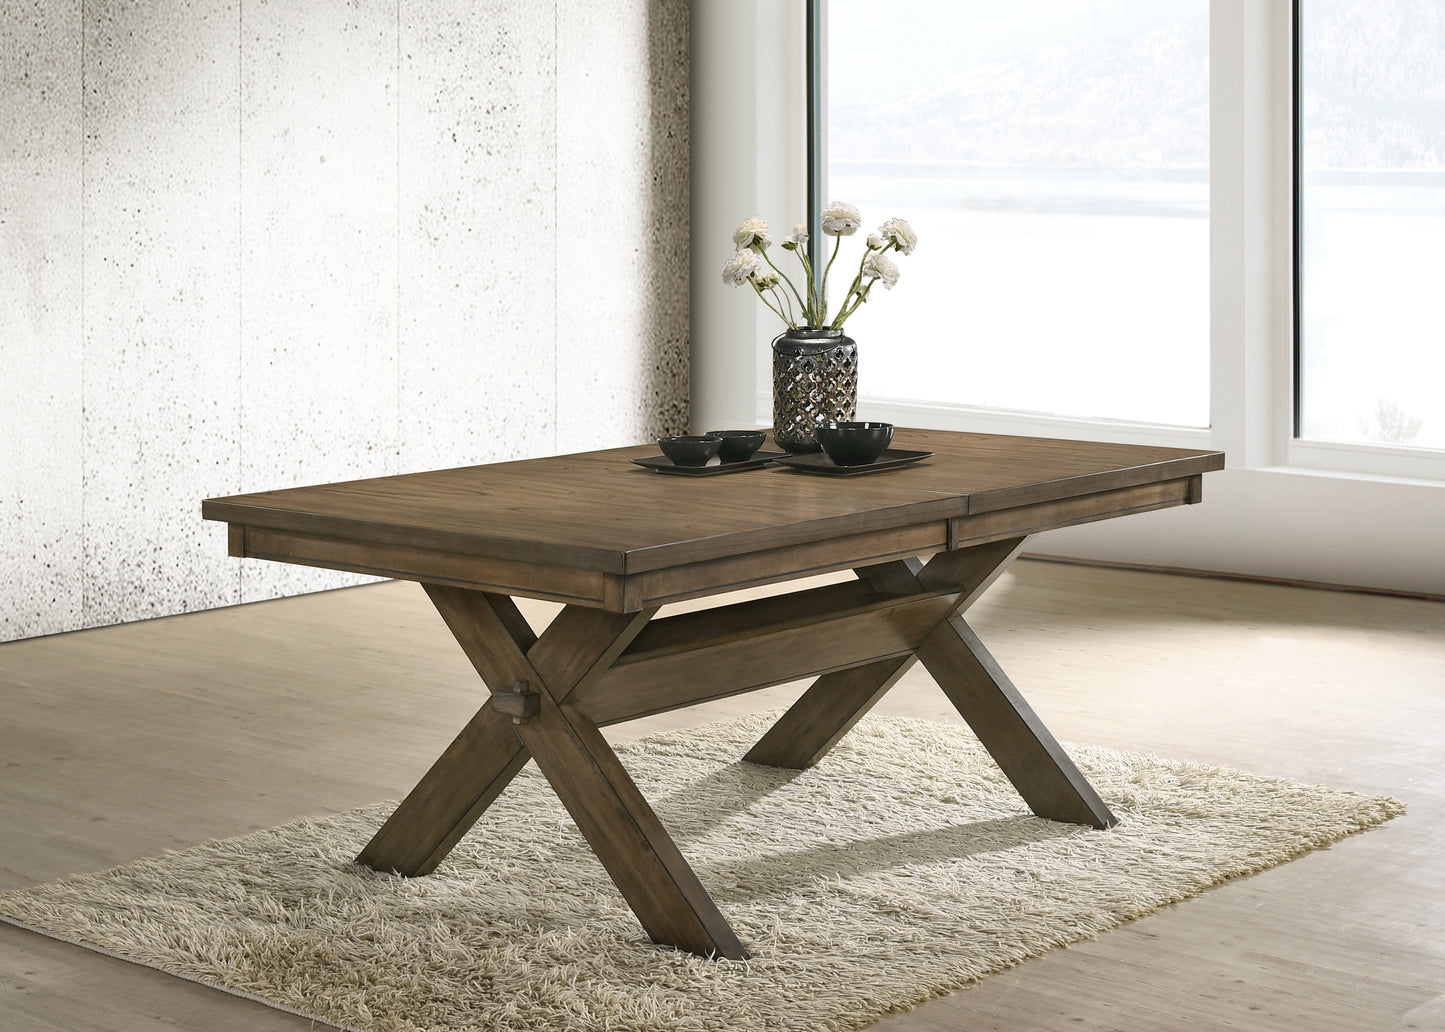 Raven Wood Cross-buck Base Dining Table with Butterfly Leaf